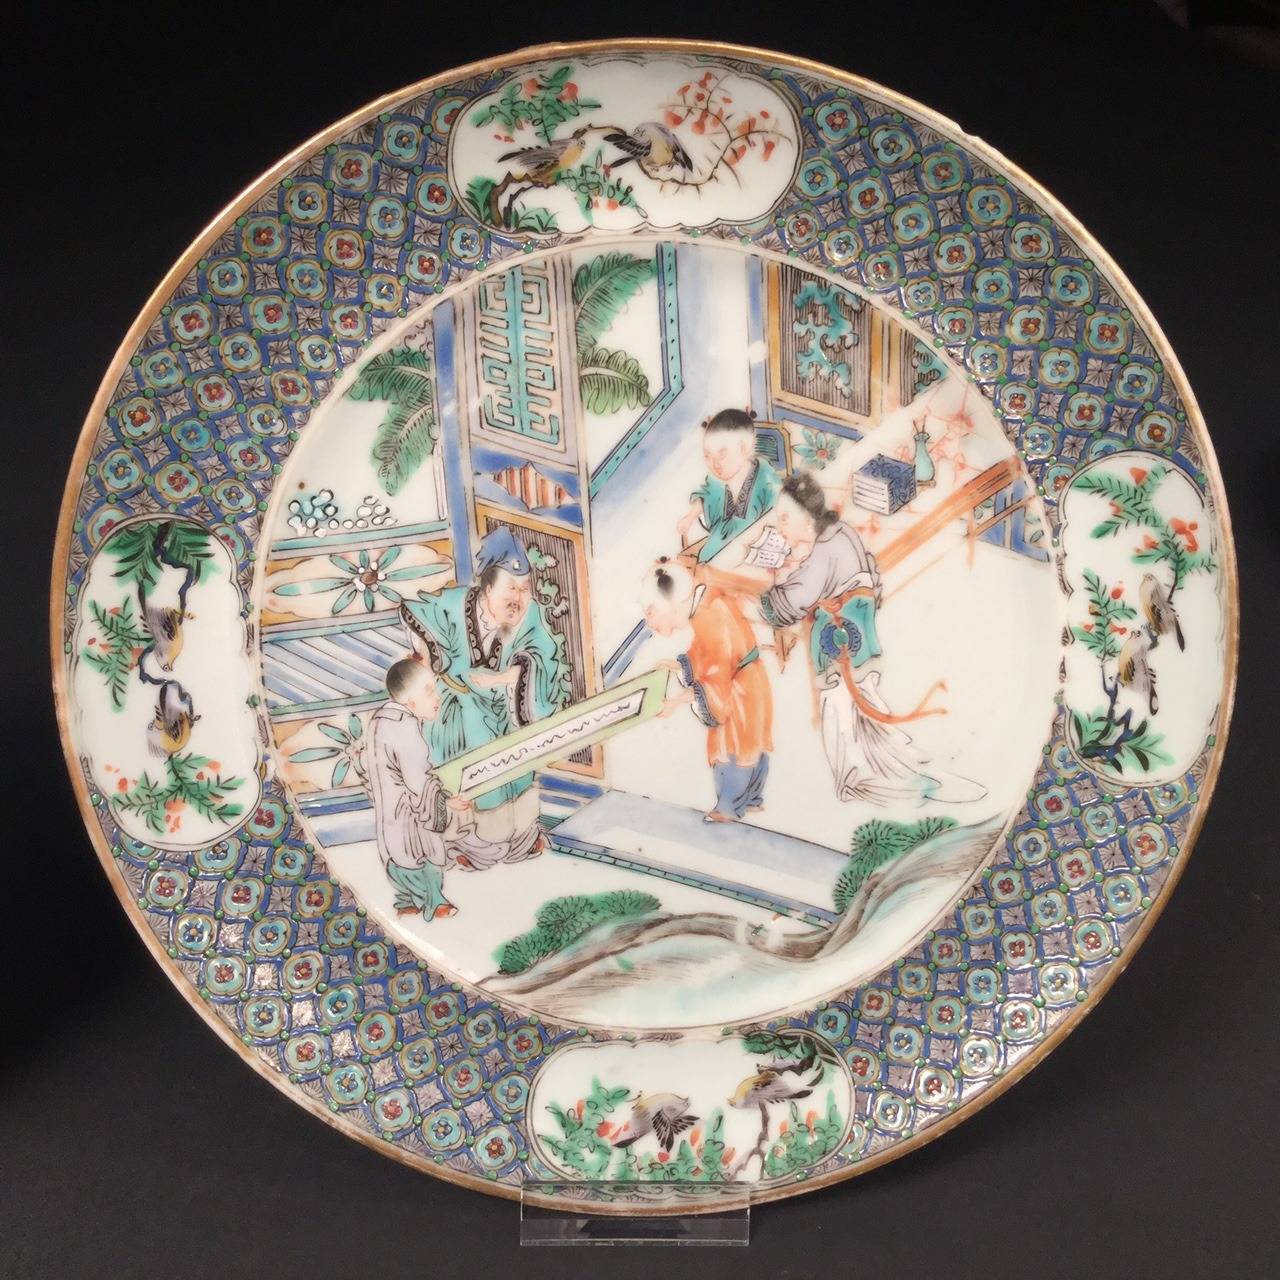 Porcelain China, Pair of Chinese Export Green Canton Mandarin Plates, Mid-19th Century